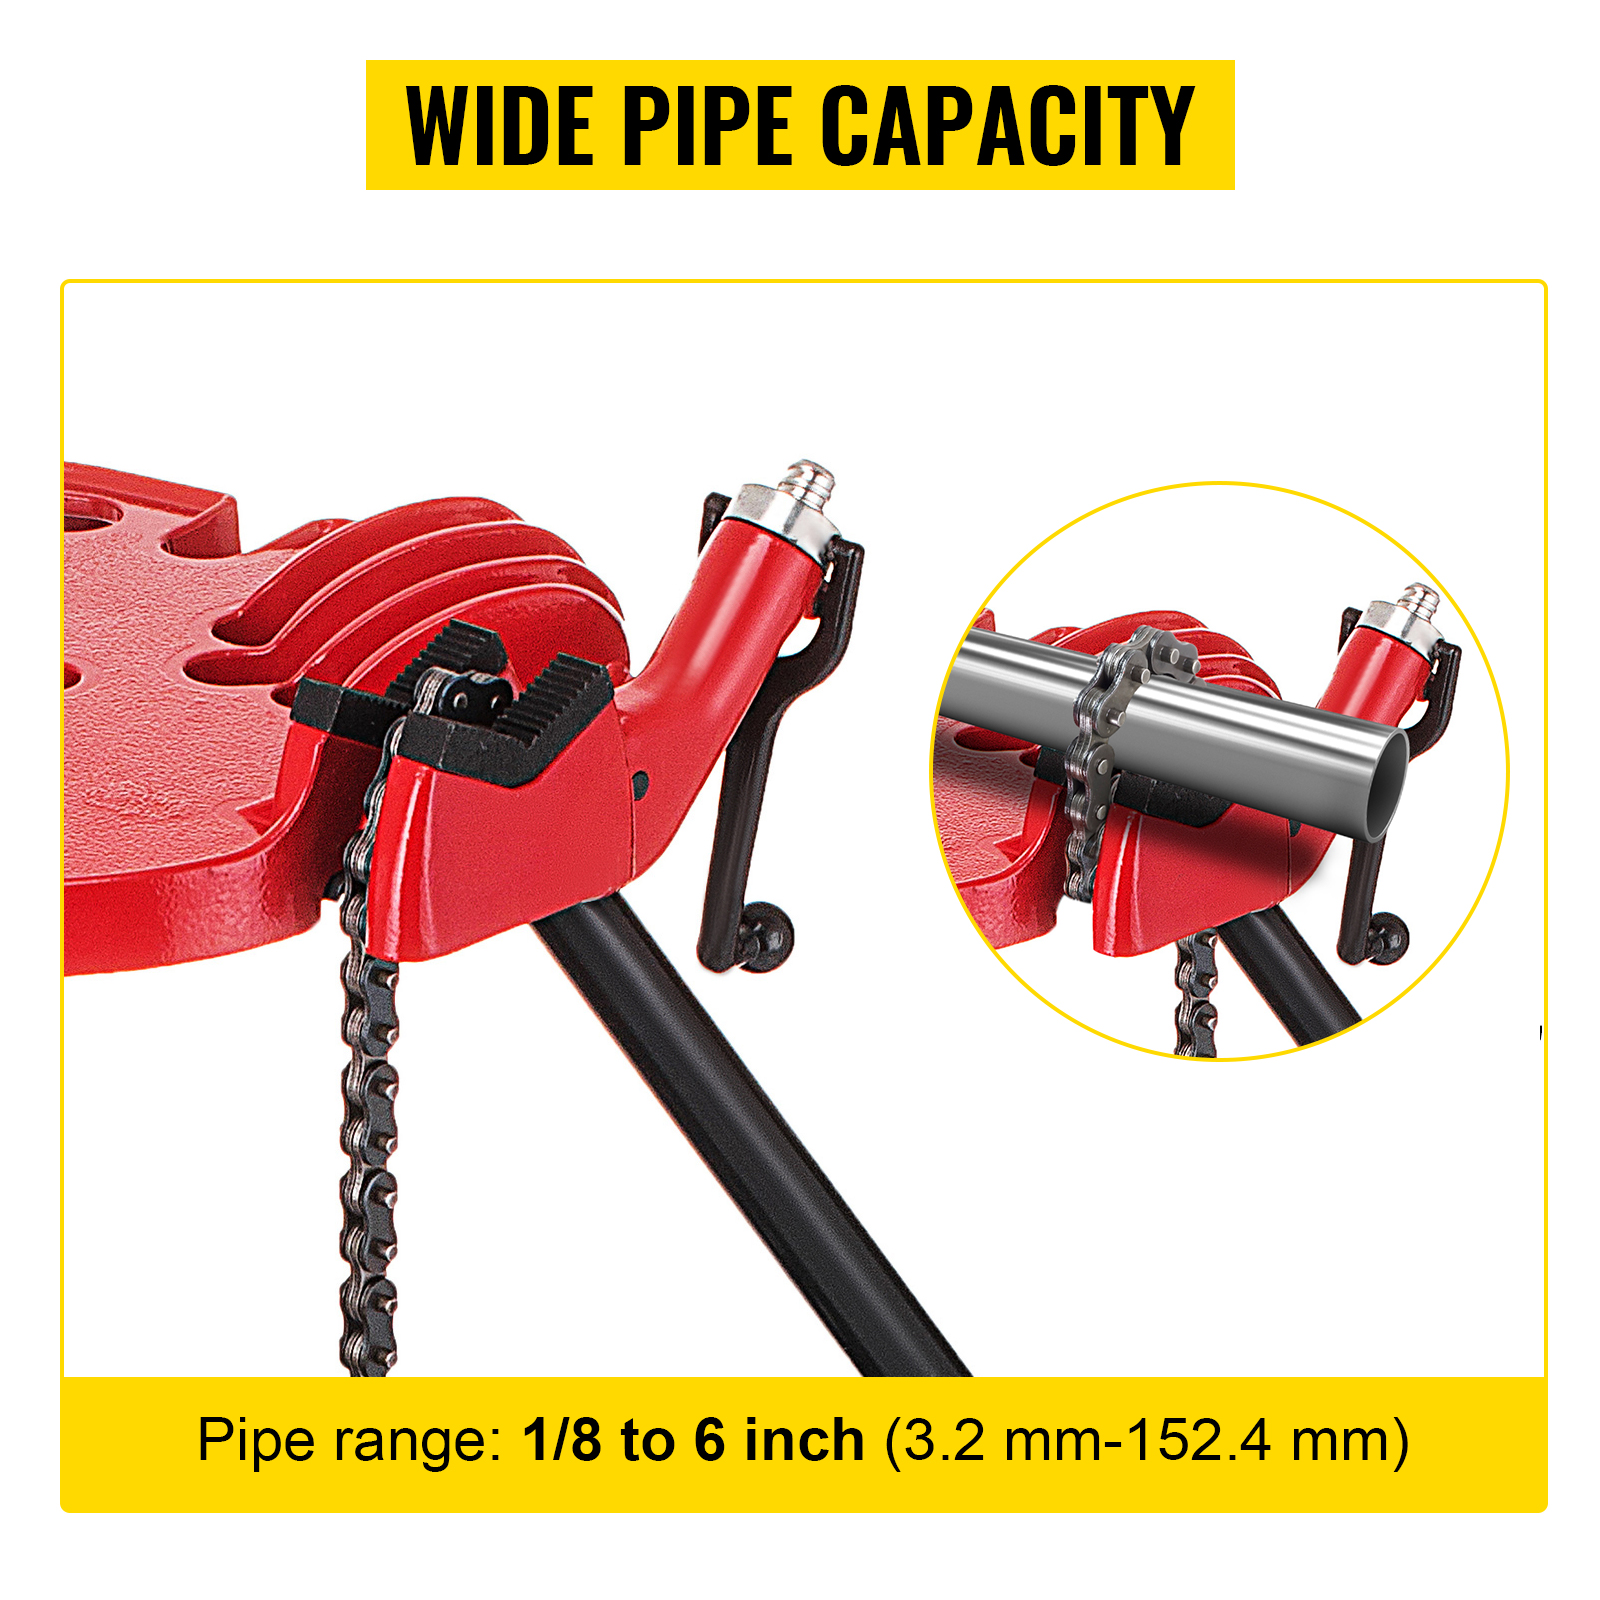 Portable 6" Tripod Pipe Chain Vise Stand w/ Large Base Overhangs Front Legs 